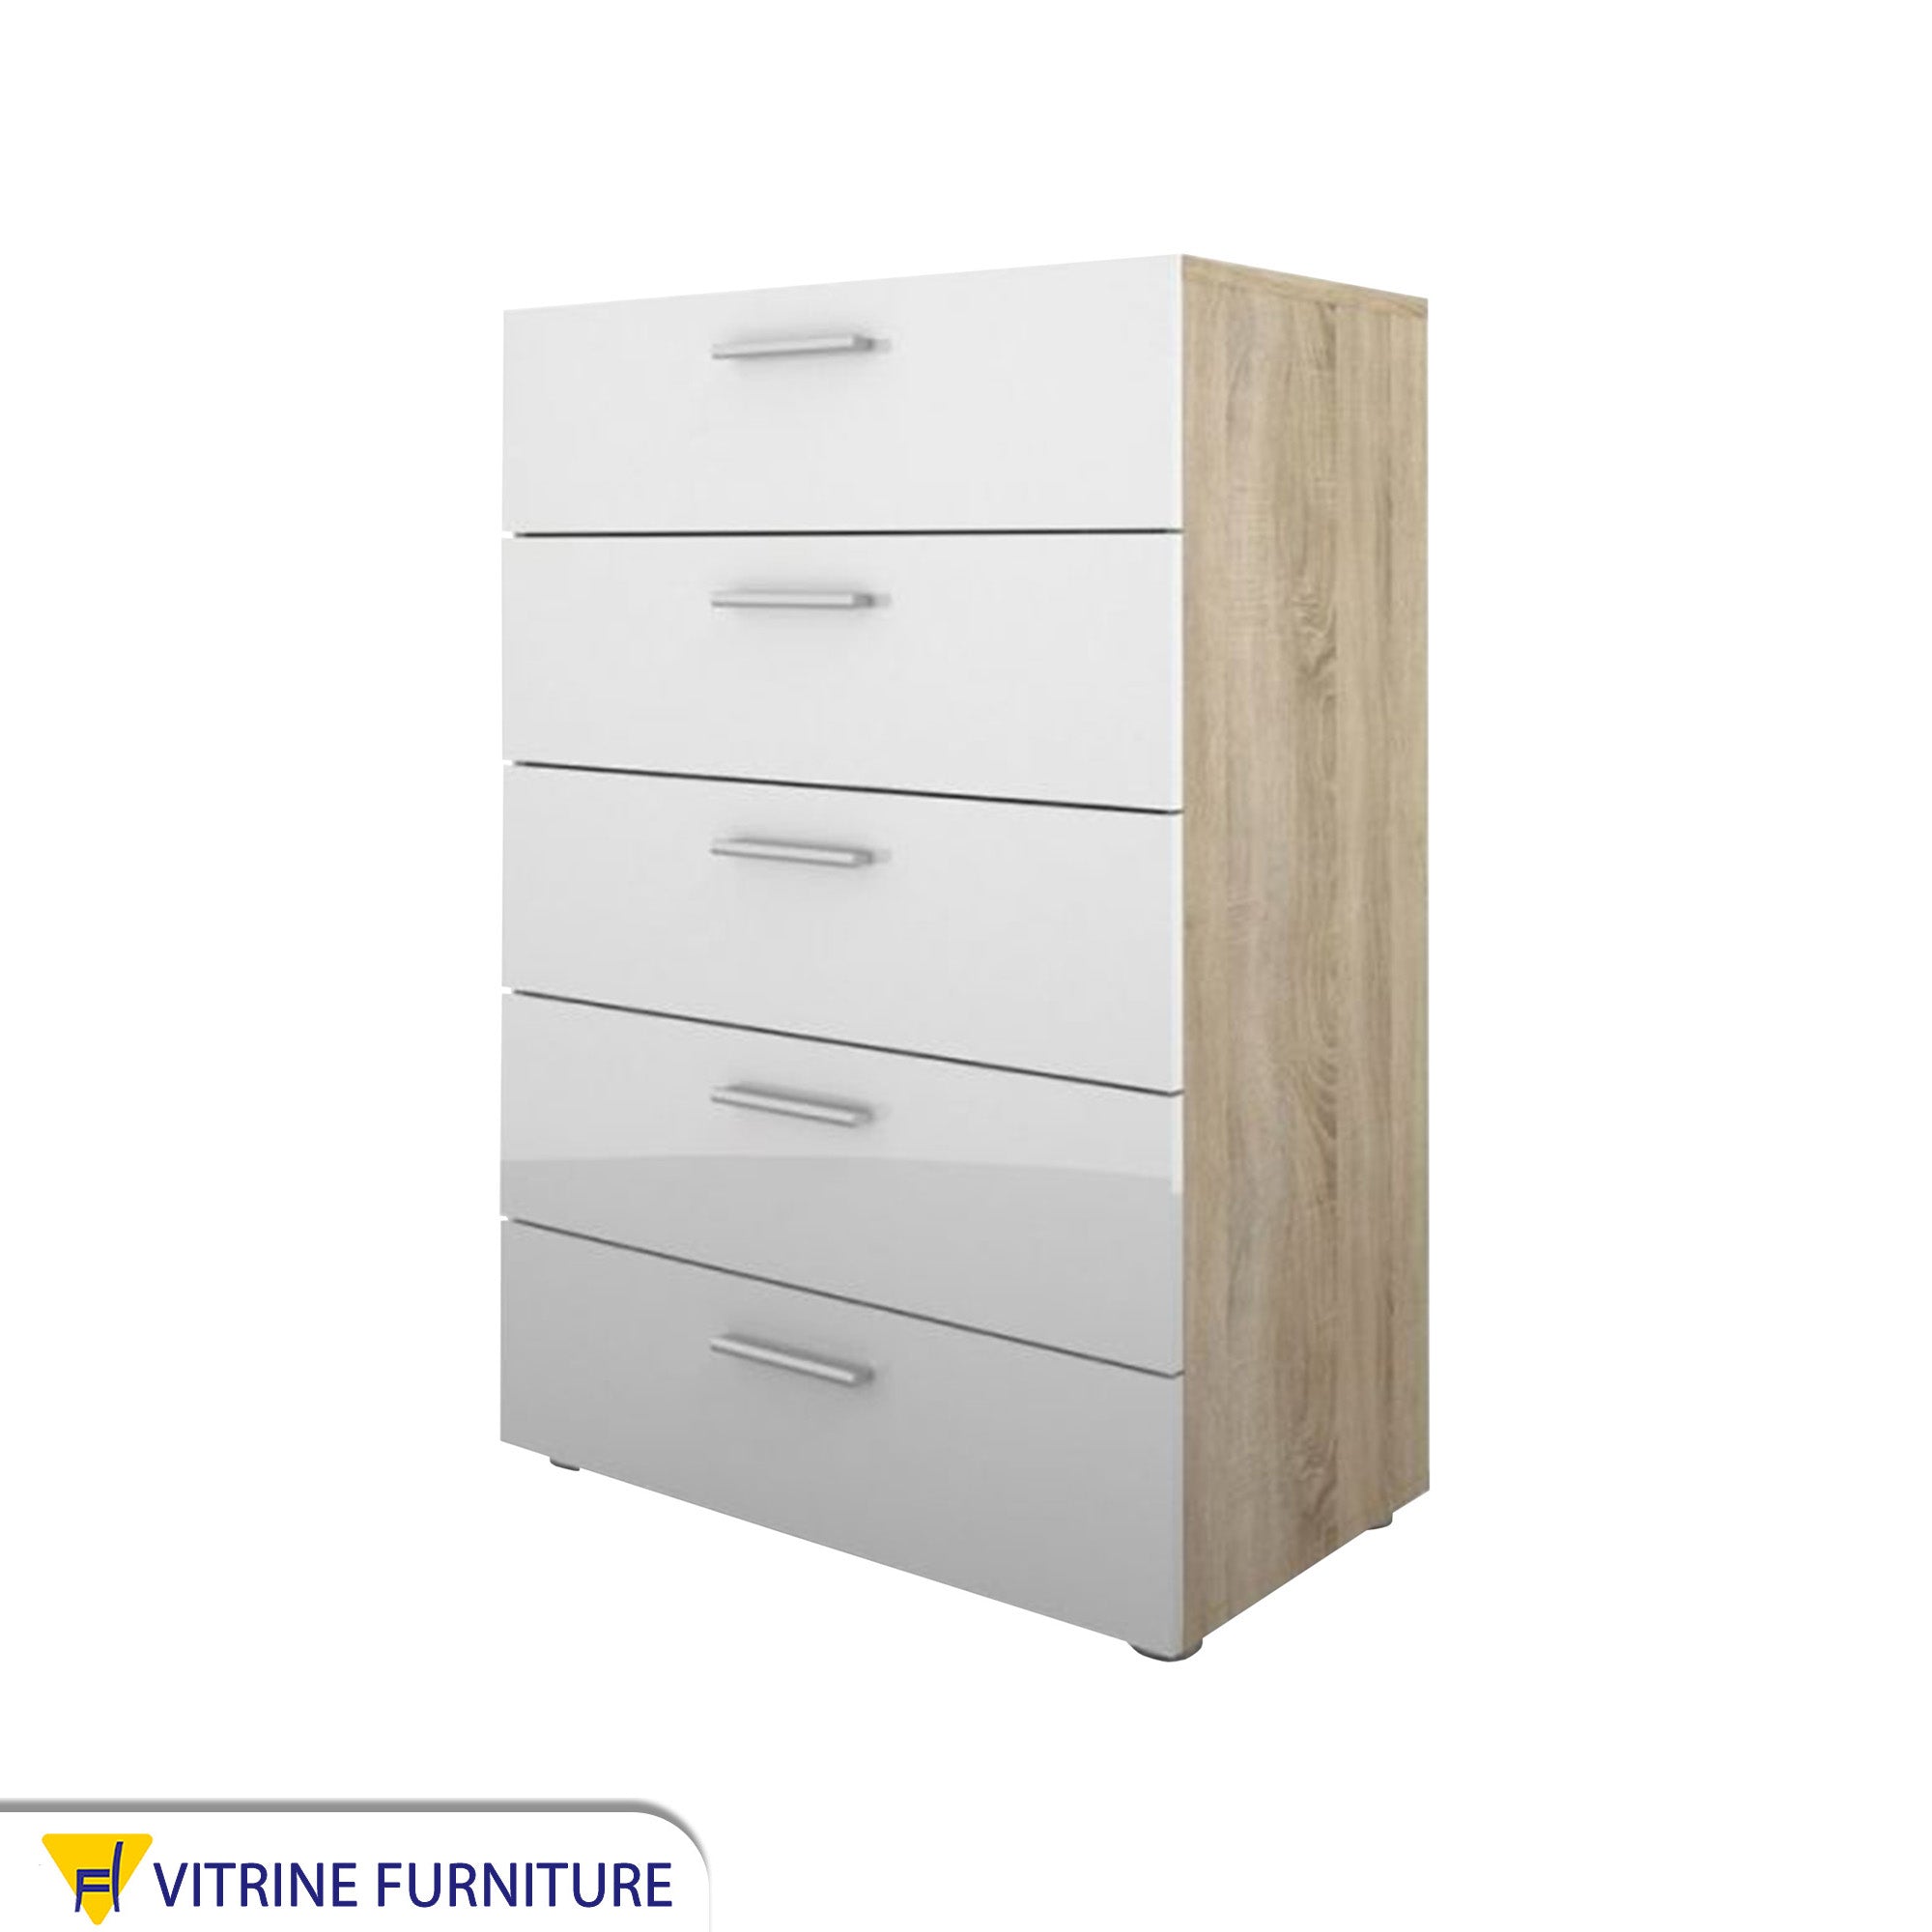 Storage unit with five drawers